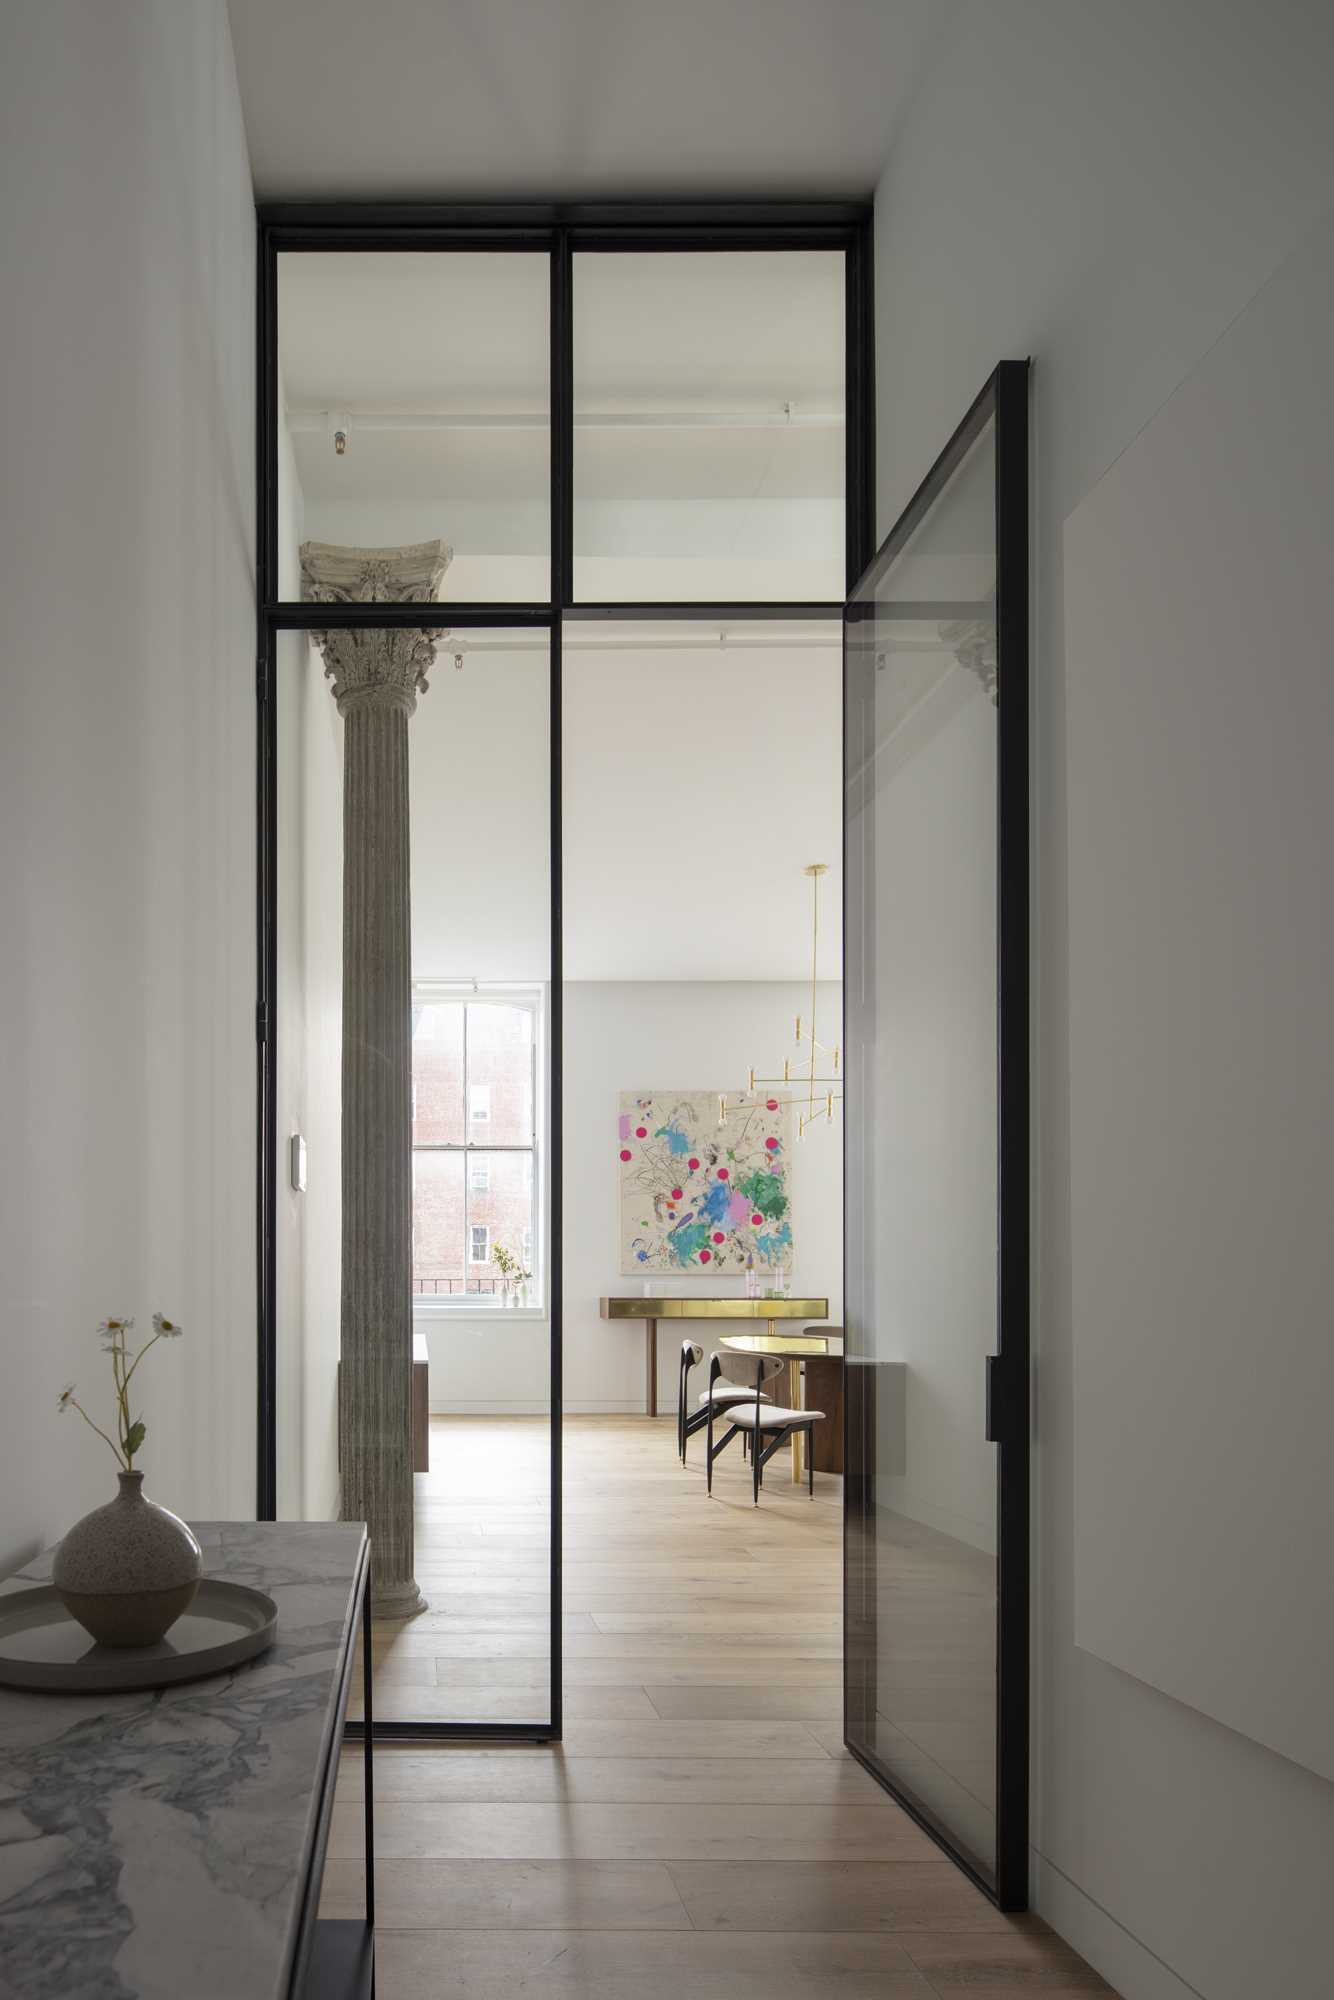 The entryway to a modern loft in New York.